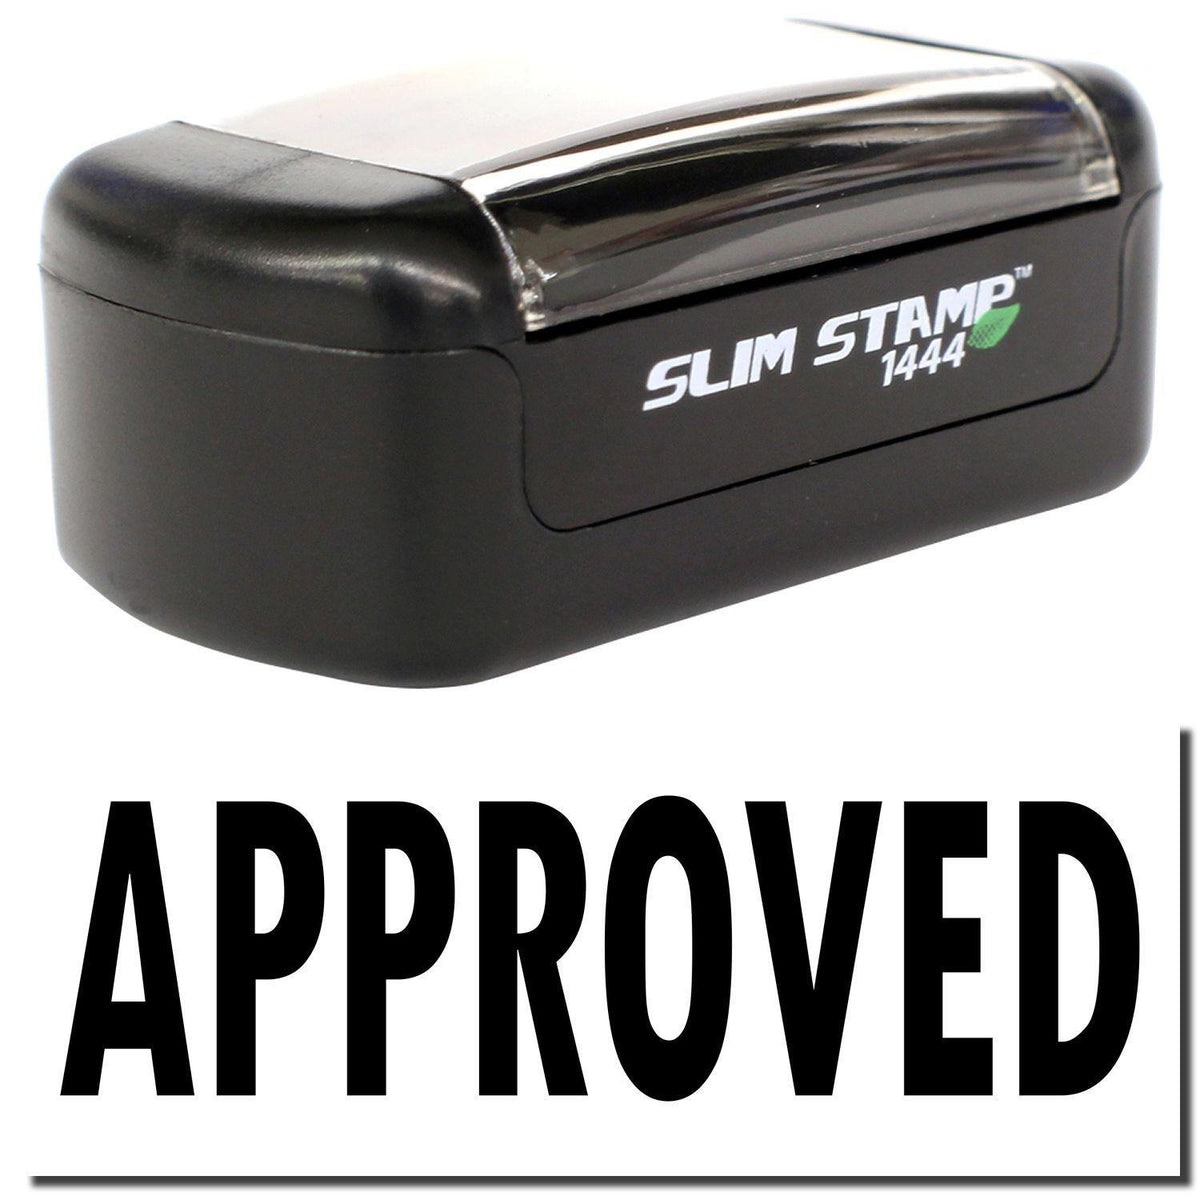 A stock office pre-inked stamp with a stamped image showing how the text &quot;APPROVED&quot; is displayed after stamping.